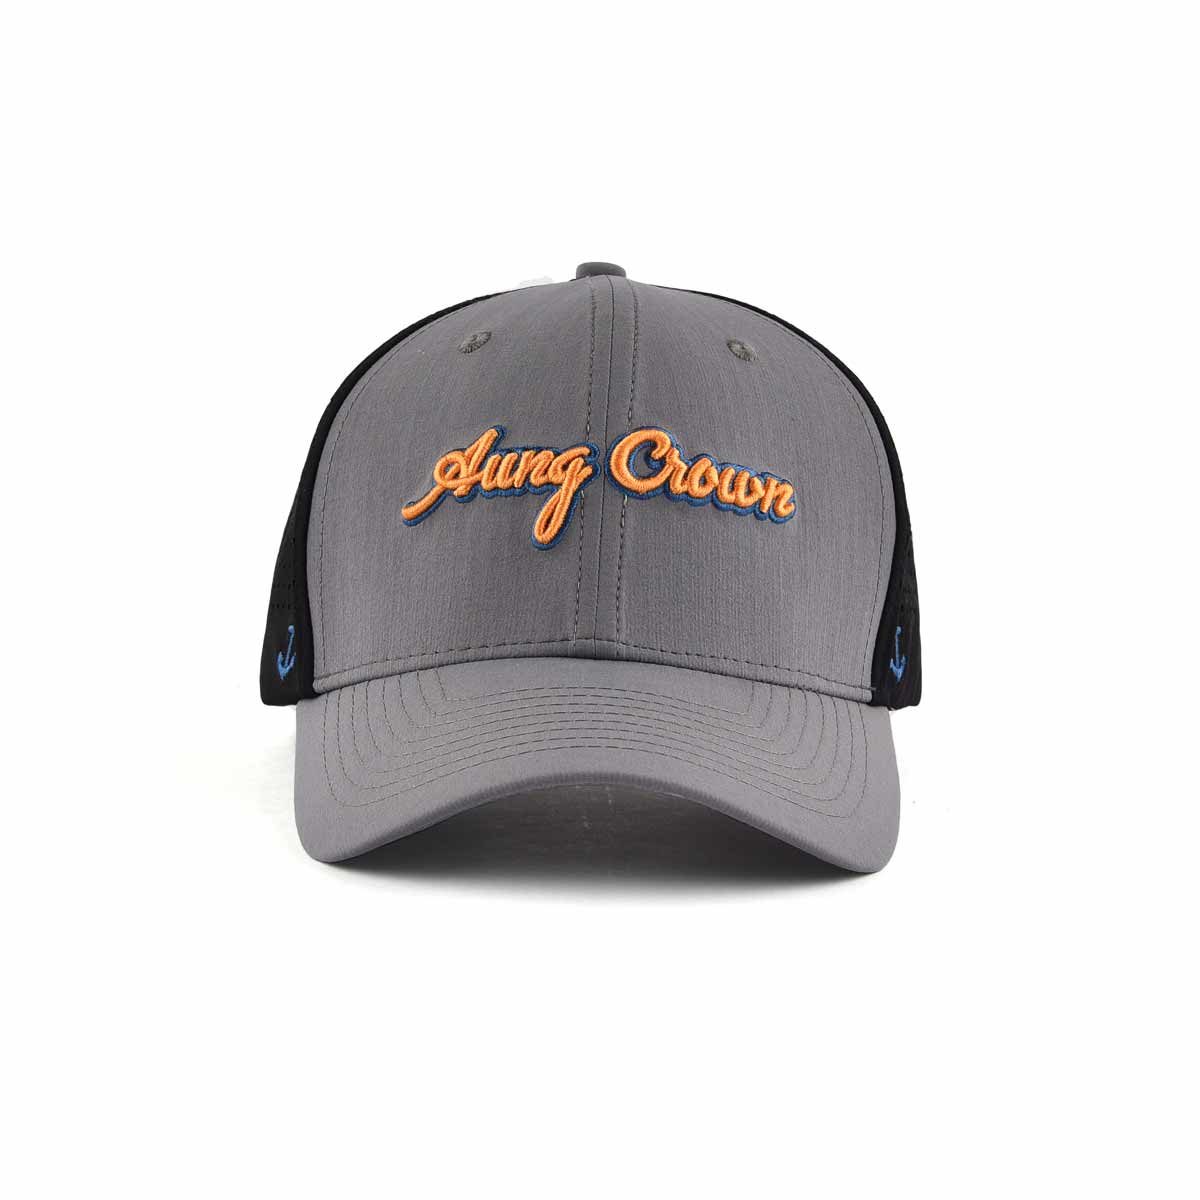 Aung-Crown-patchwork-grey-trucker-hat-for-women-and-men-KN2012042